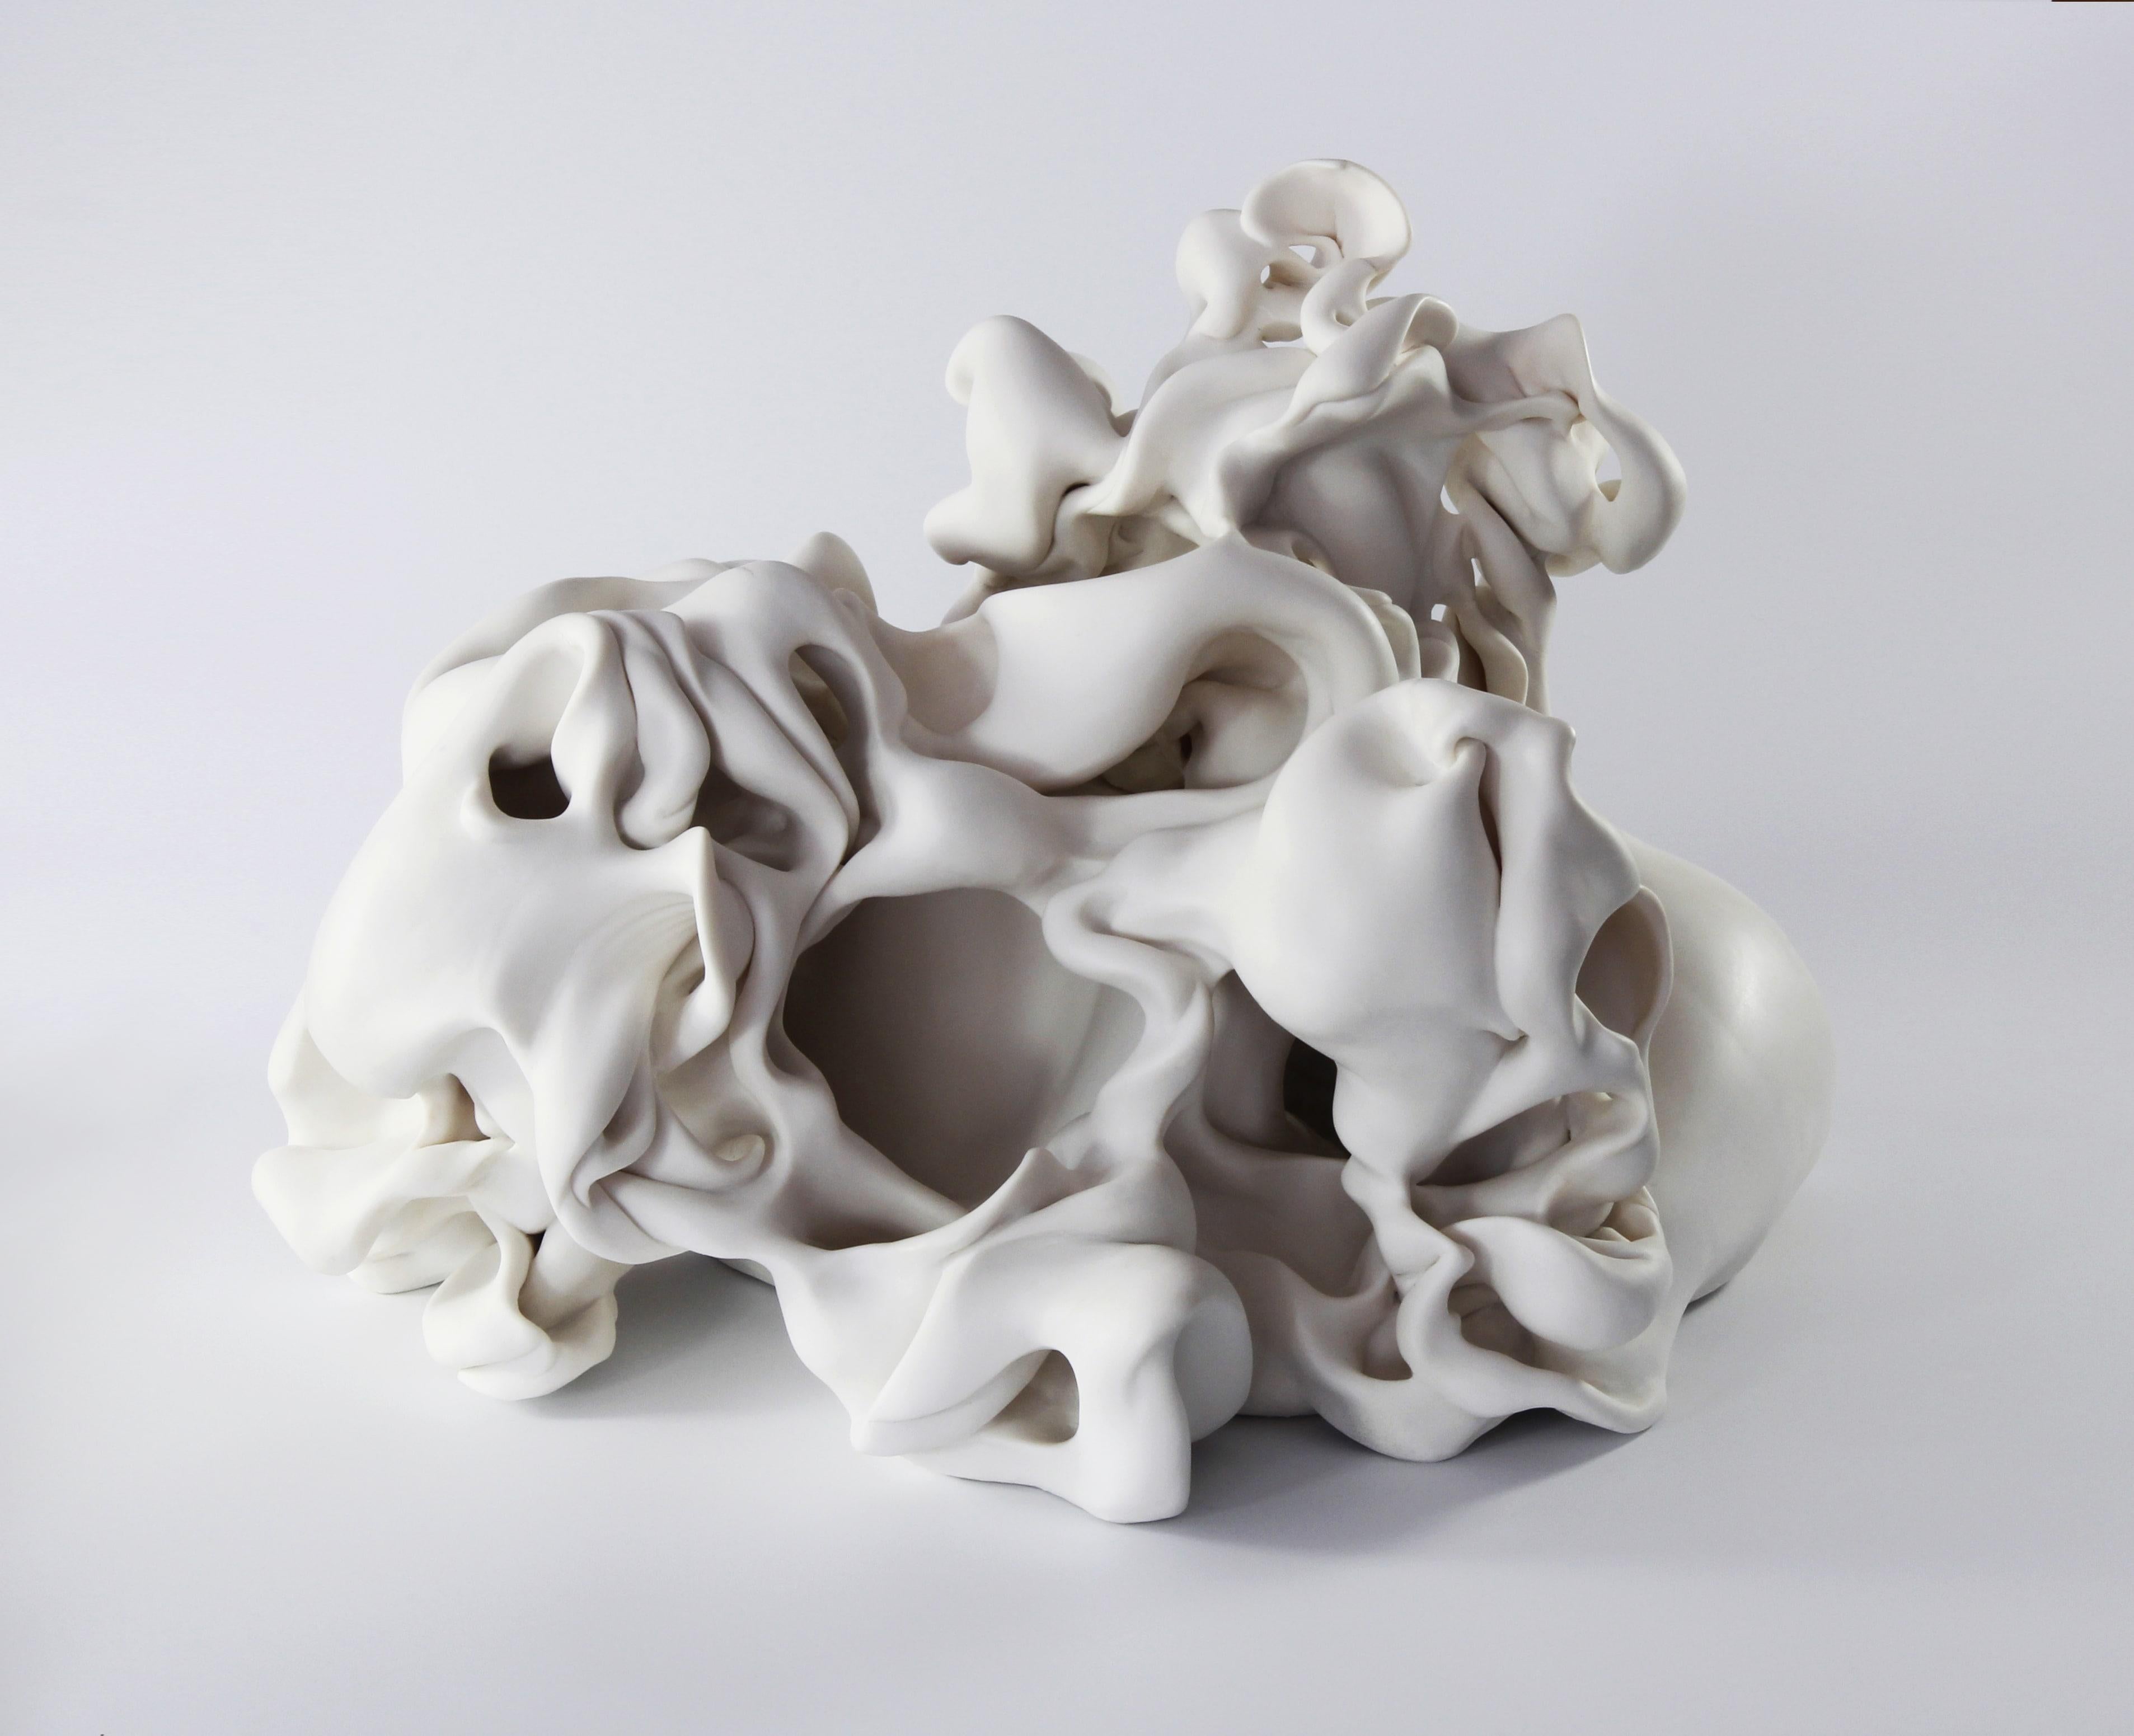 Untitled 5, Abstract porcelain sculpture - Sculpture by Sharon Brill